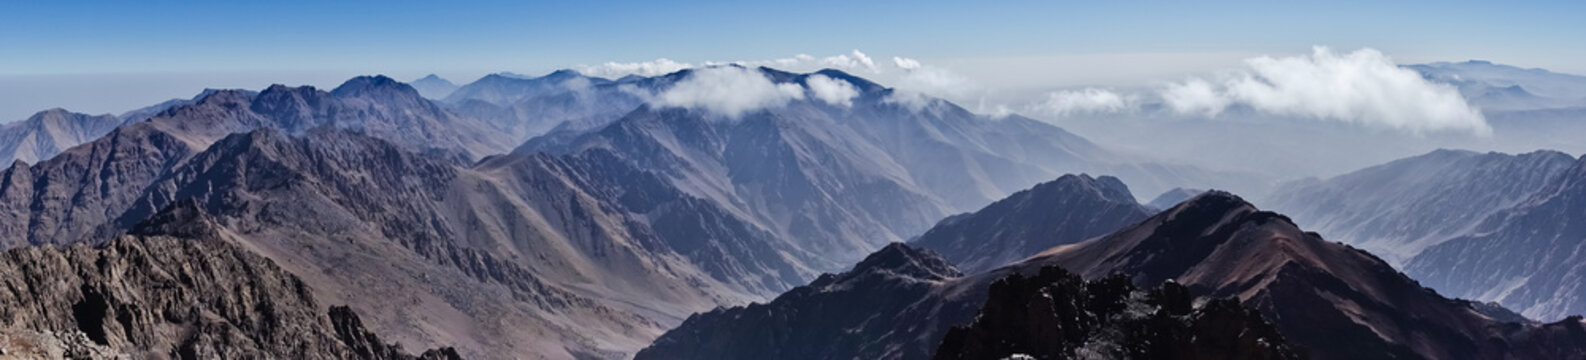 Panorama of Toubkal and other highest mountain peaks of High Atlas mountains in Toubkal national park, Morocco, North Africa